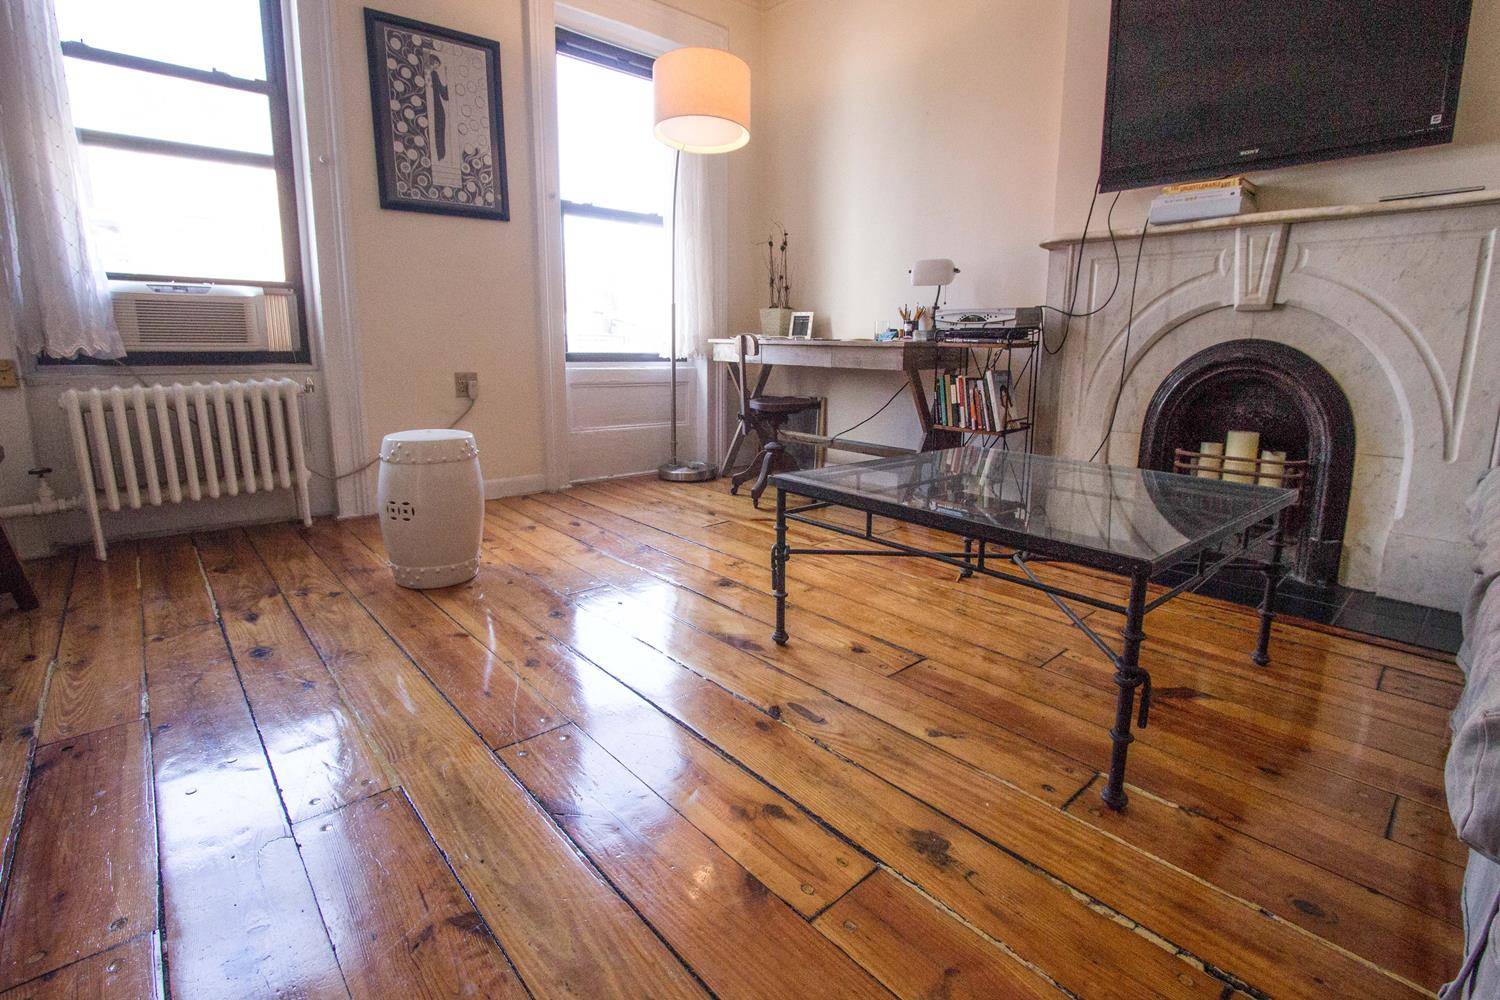 Greenwich Village, 19 Bank Street, Large, L shaped Alcove StudioApt 3RRenovated Alcove Studio Apt in Historic Brownstone with high ceilings, ceramic bathroom, Wide Plank Yellow Pine Floors, decorative marble fireplace ...